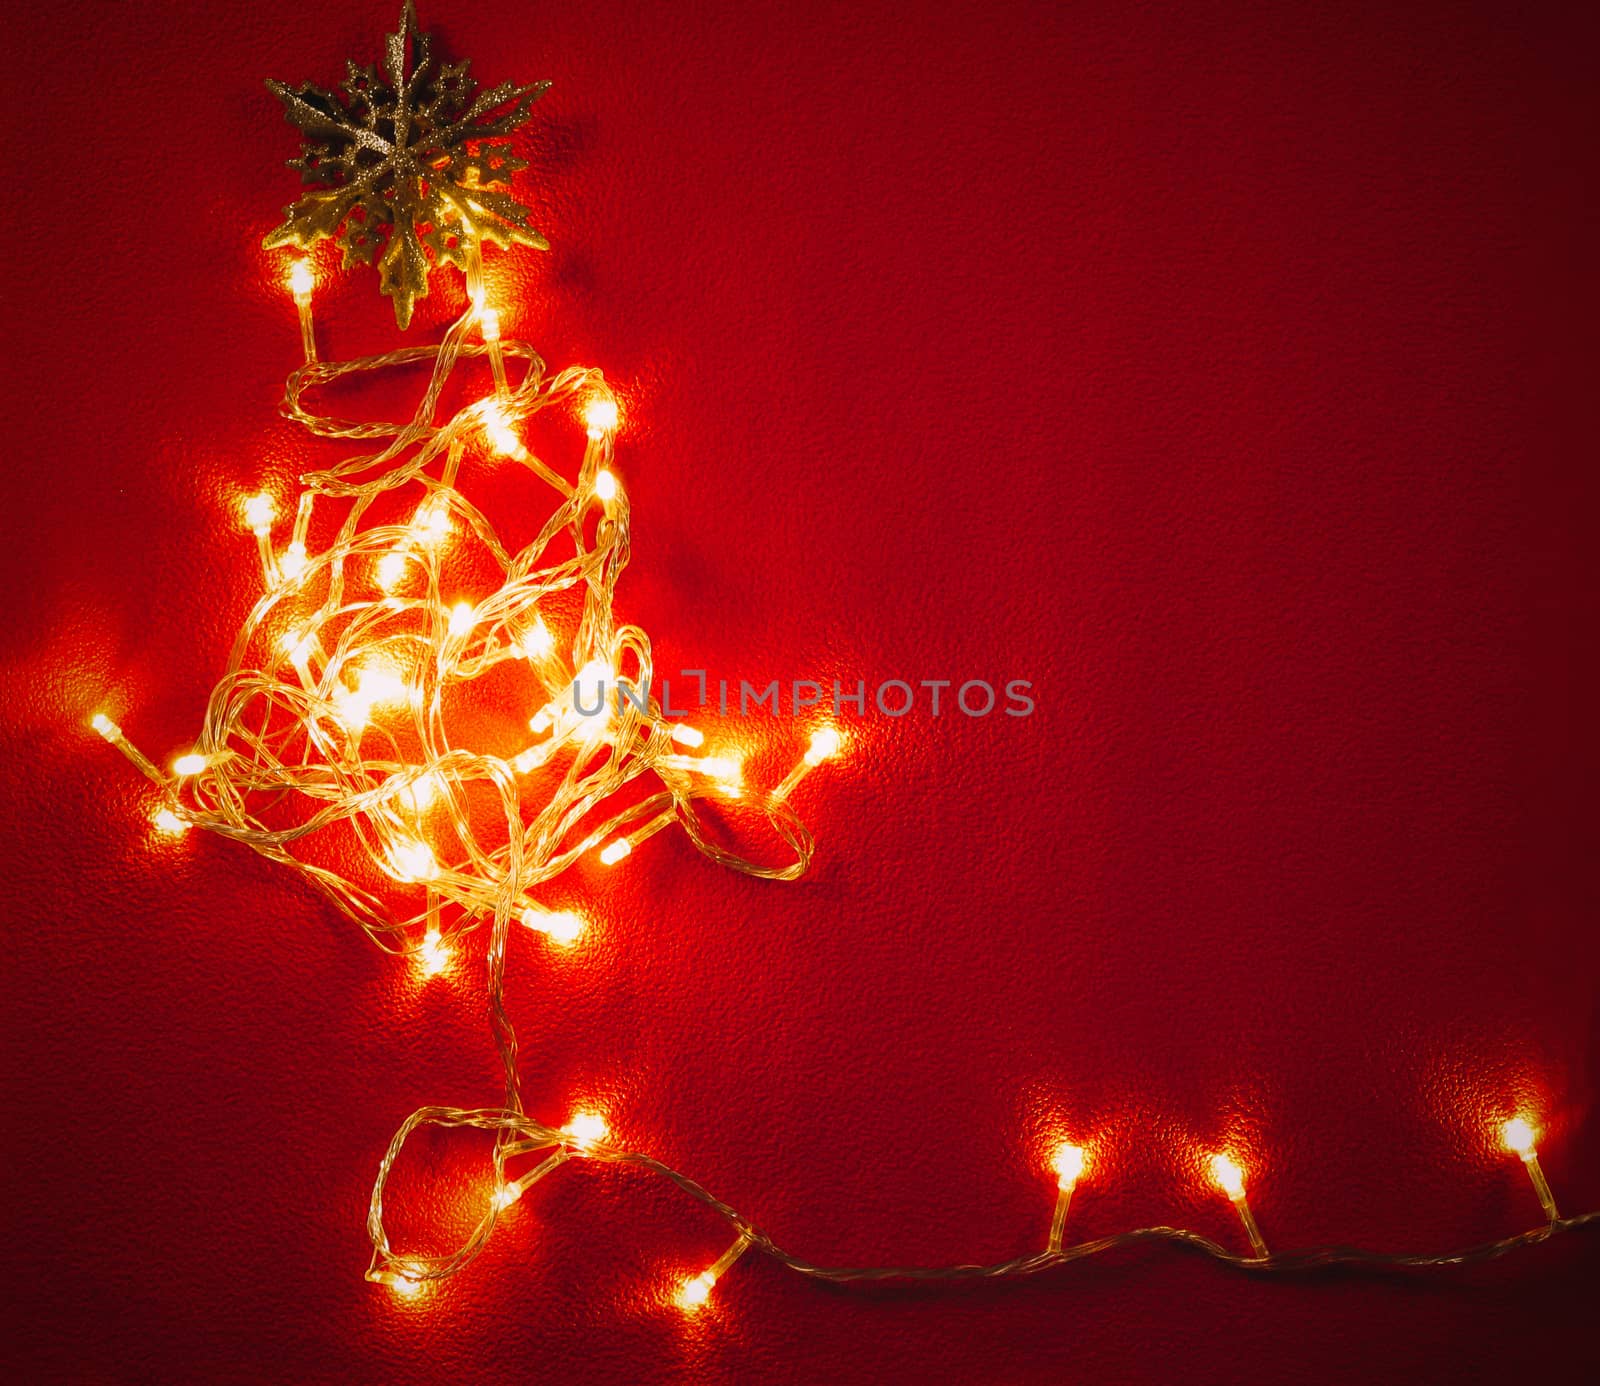 Greeting Season concept.Christmas light and pine star on red and green background